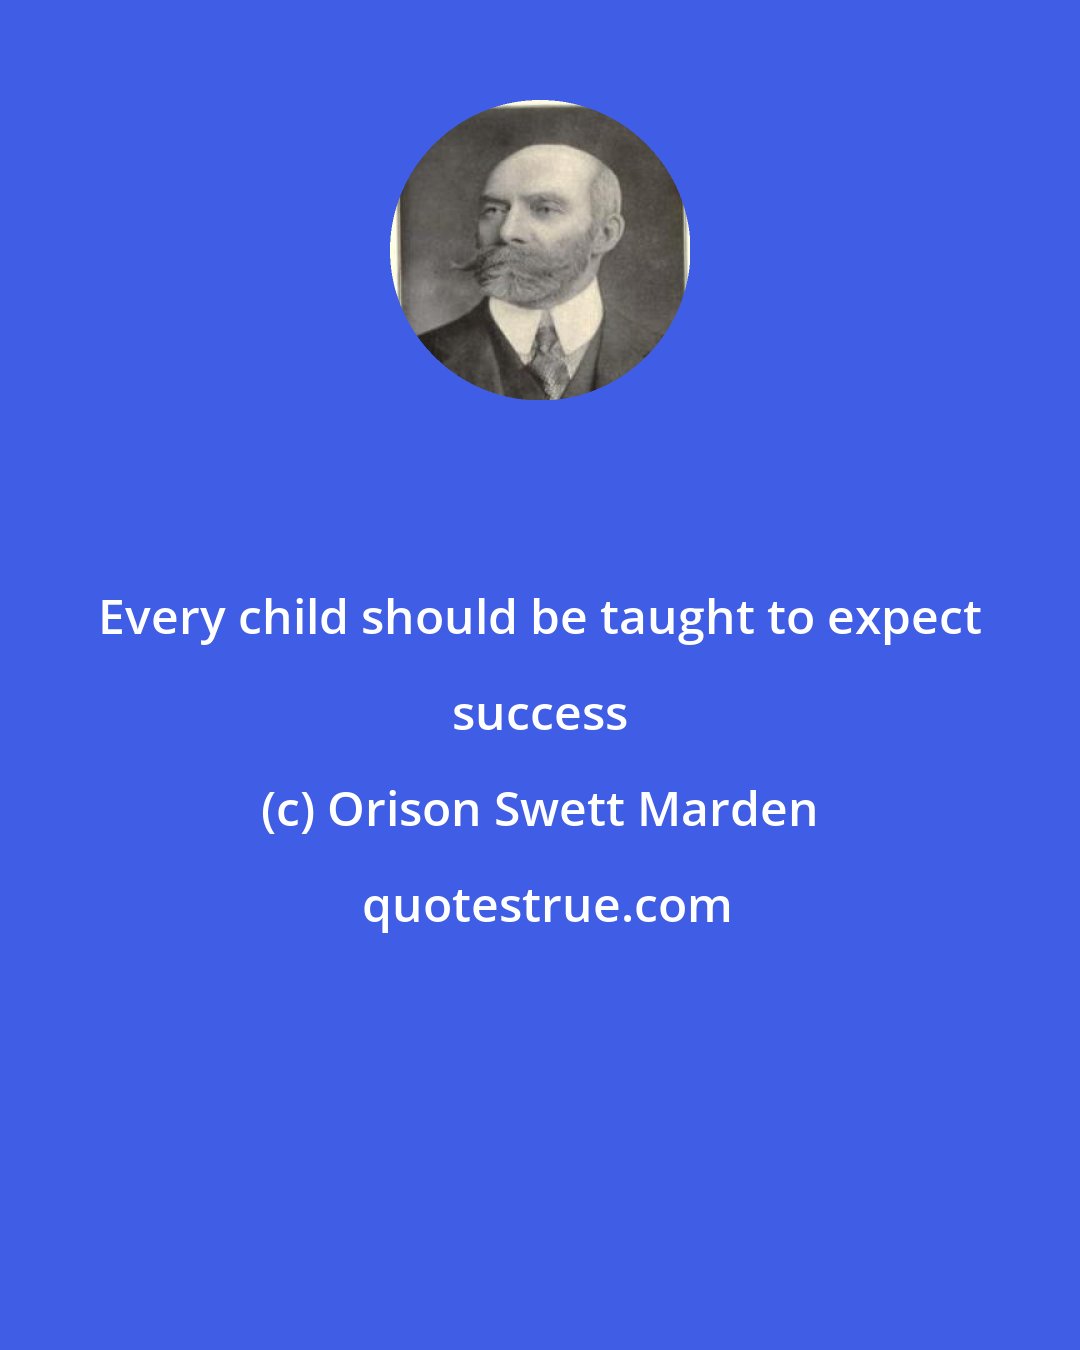 Orison Swett Marden: Every child should be taught to expect success